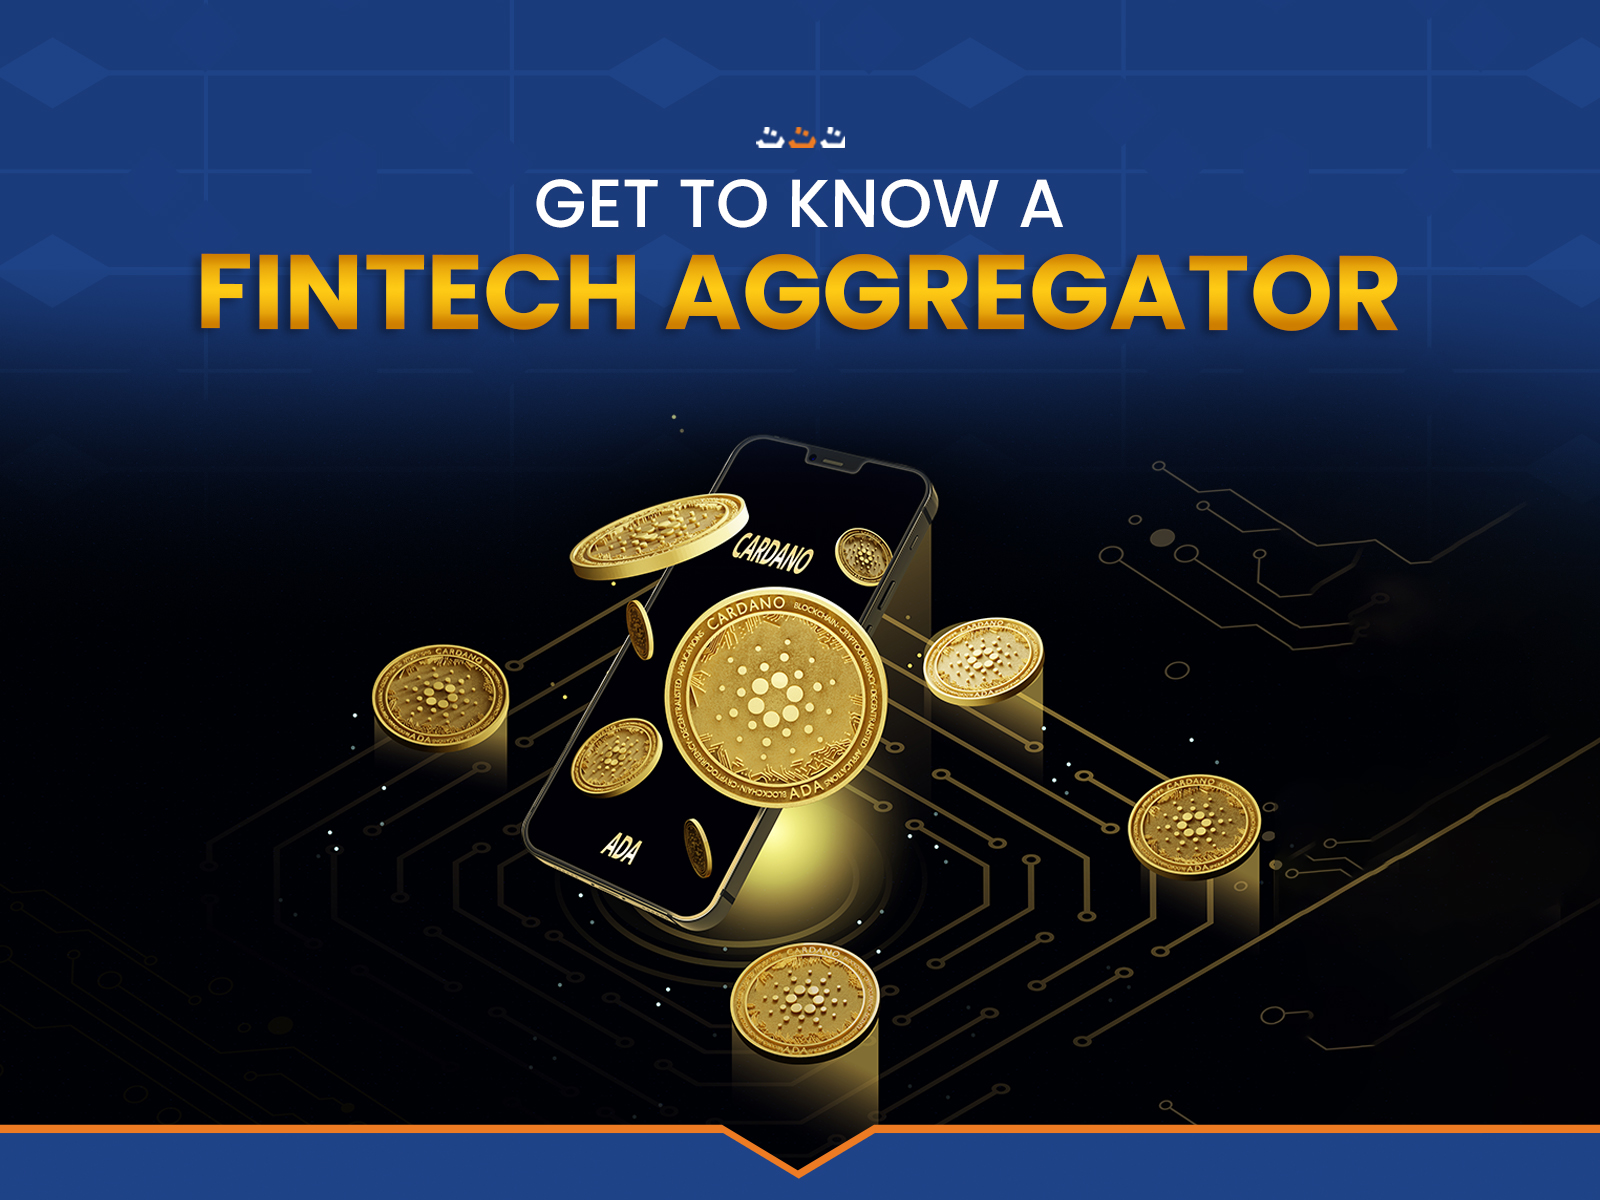 GET TO KNOW A FINTECH AGGREGATOR!